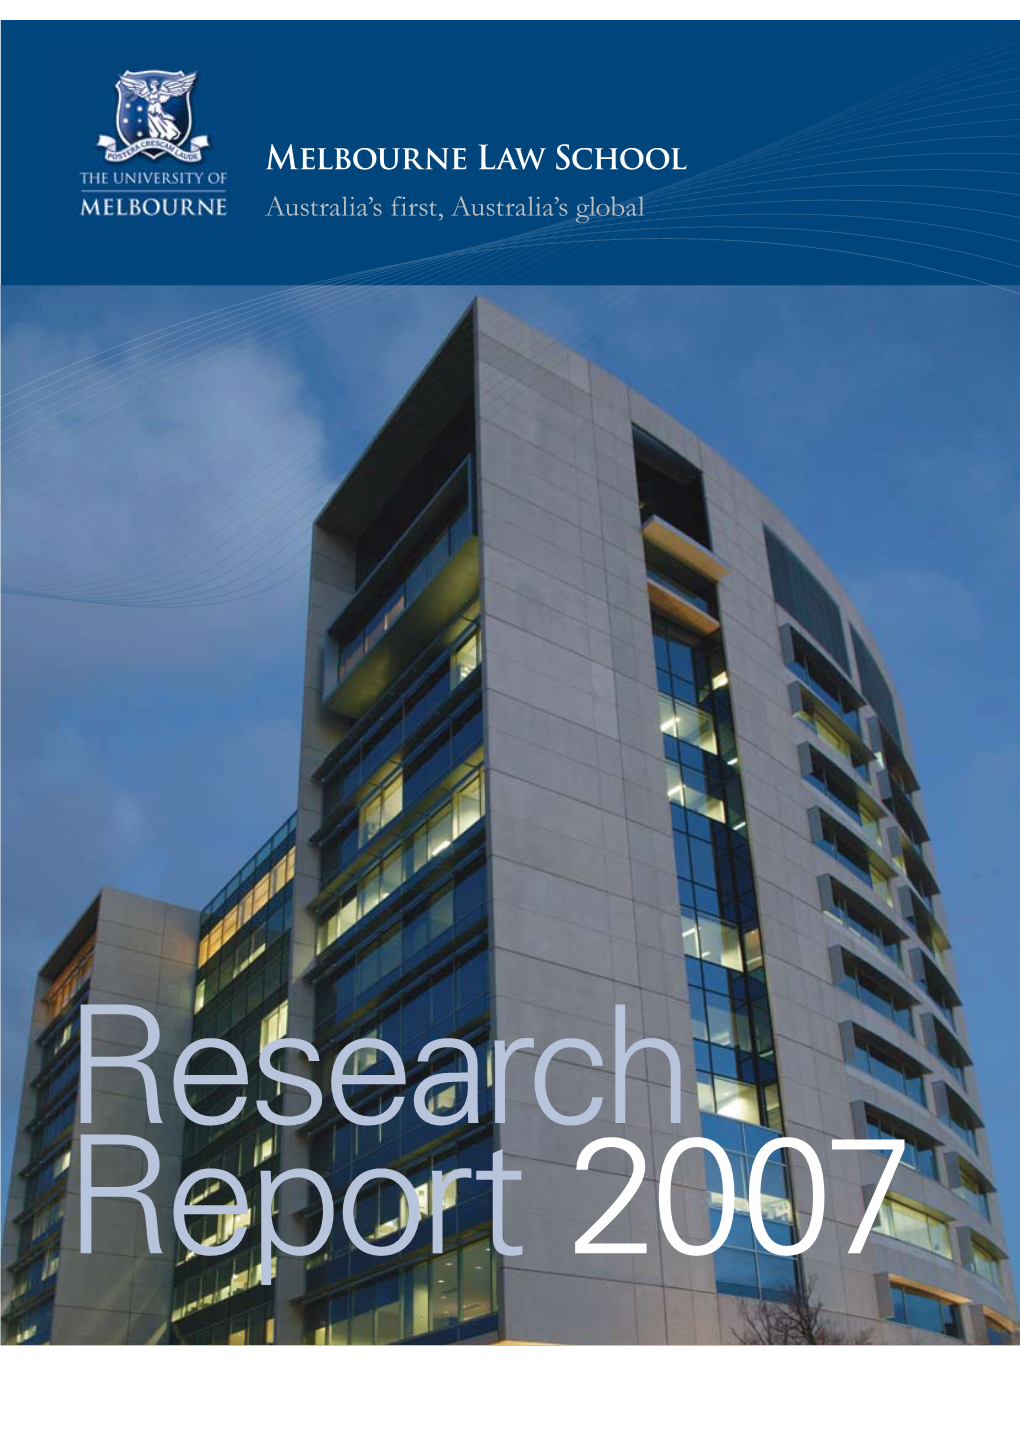 Research Report 2007 Contents